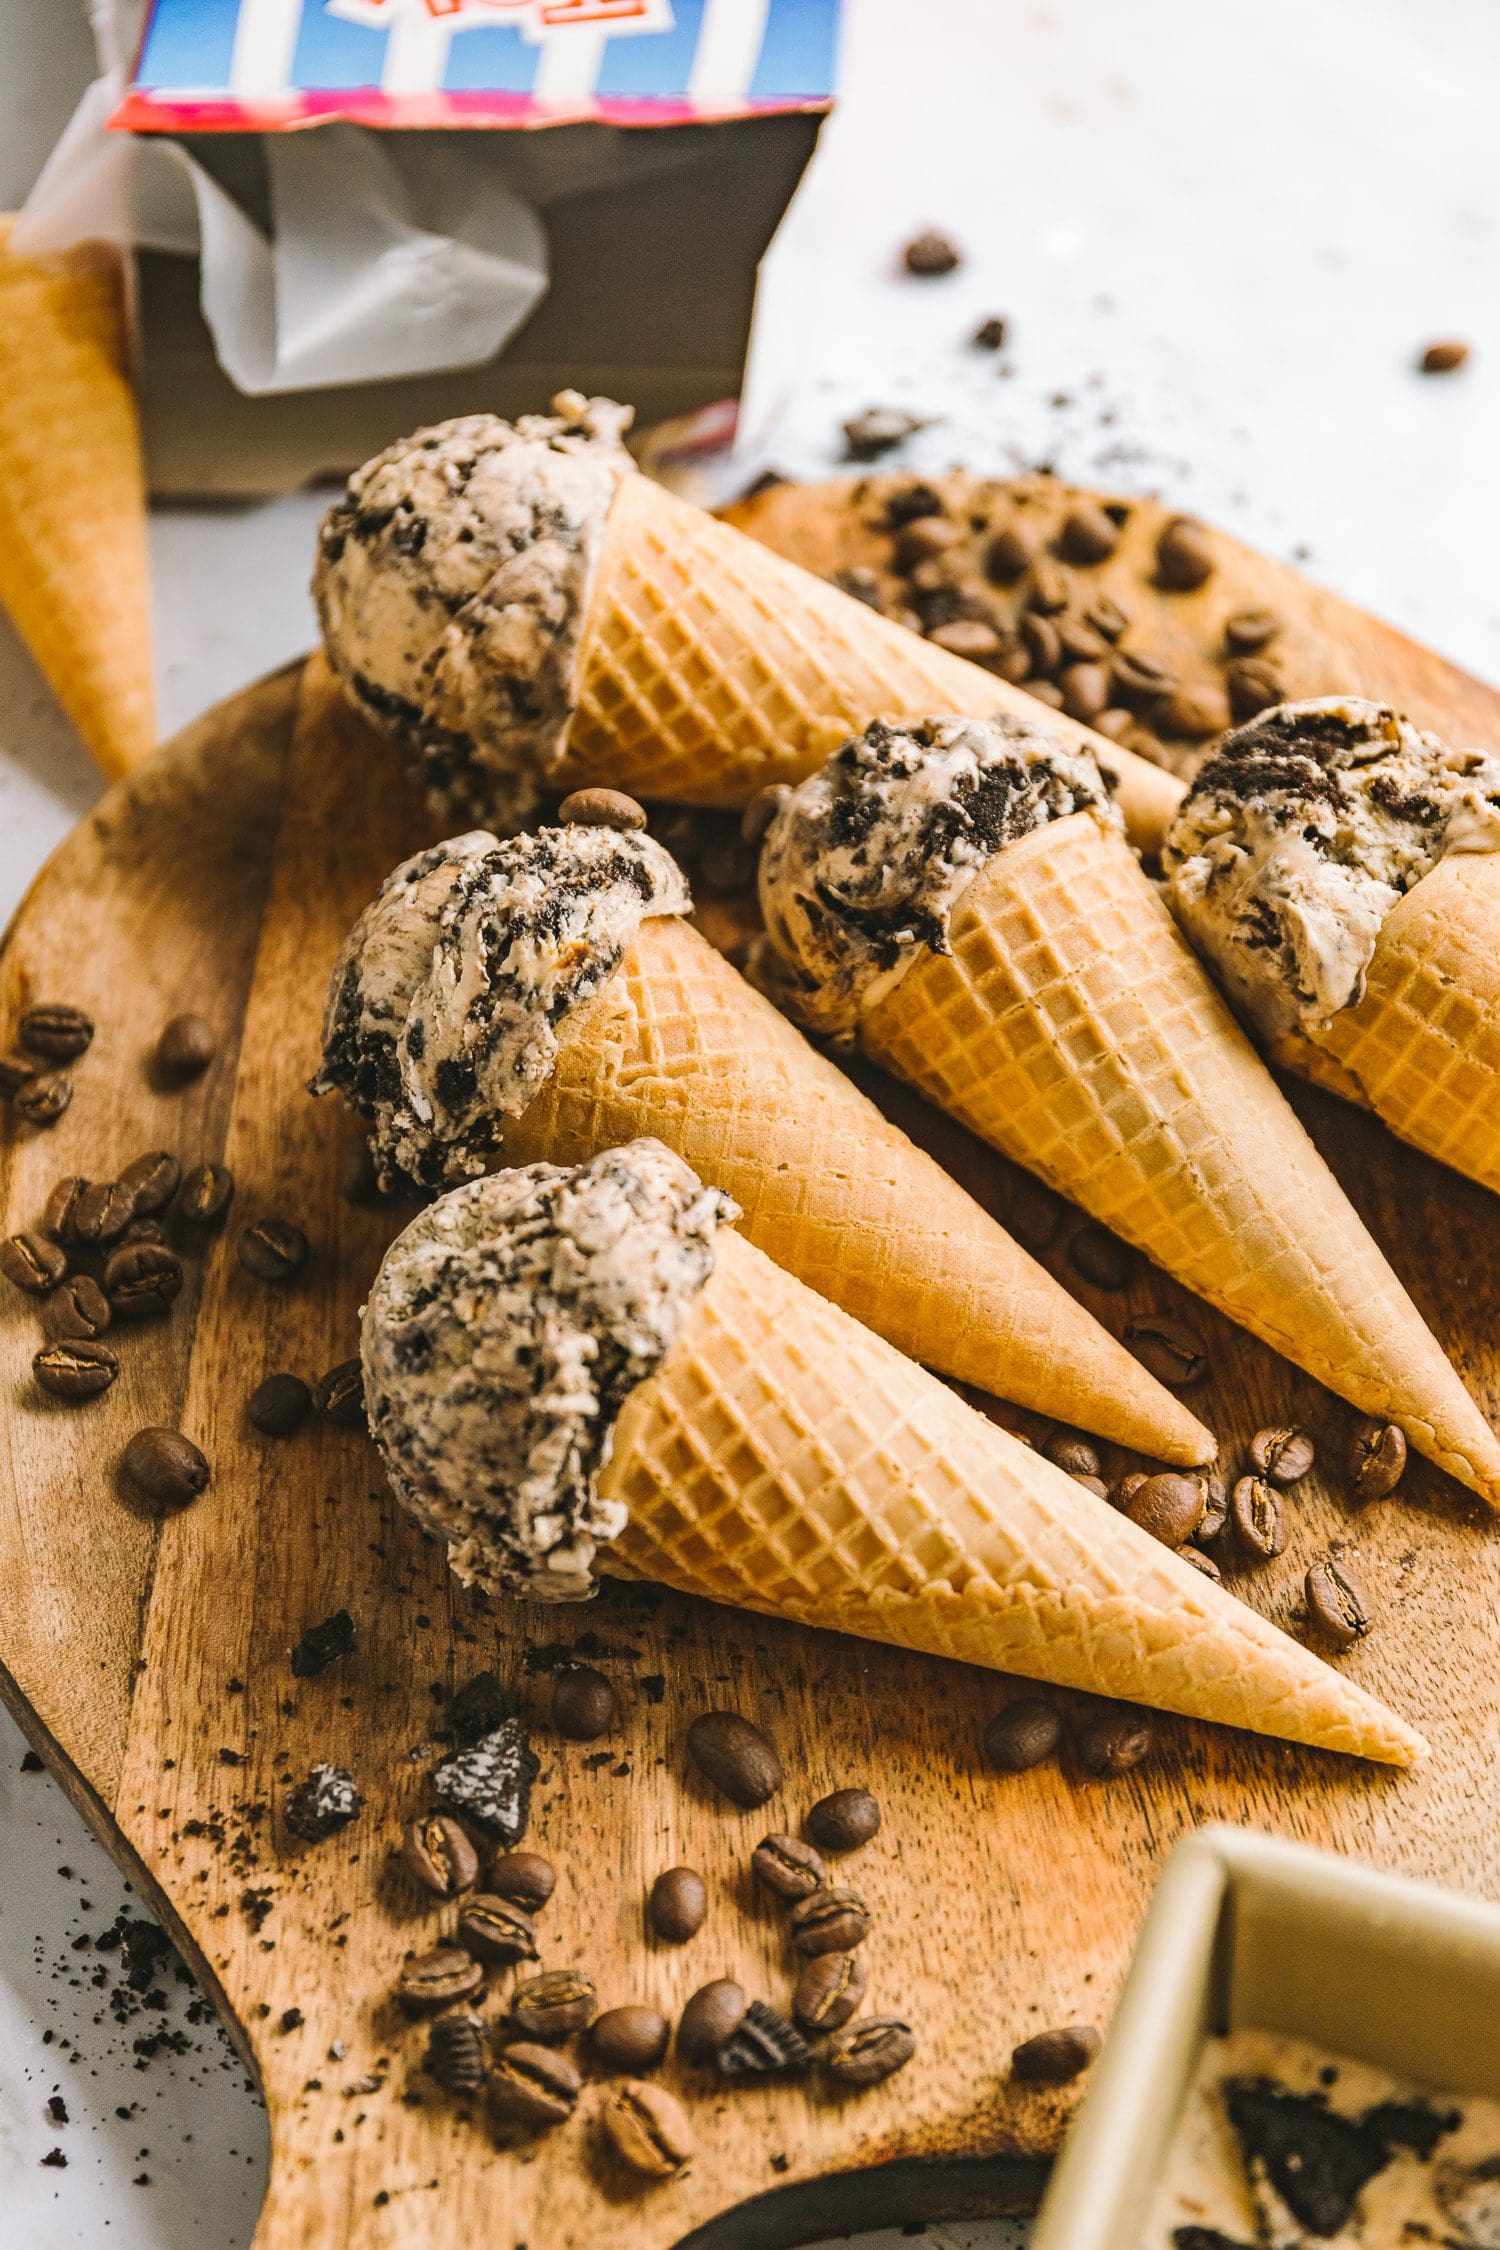 50 Homemade Ice Cream Recipes for the Ice Cream Maker - A Food Lover's  Kitchen